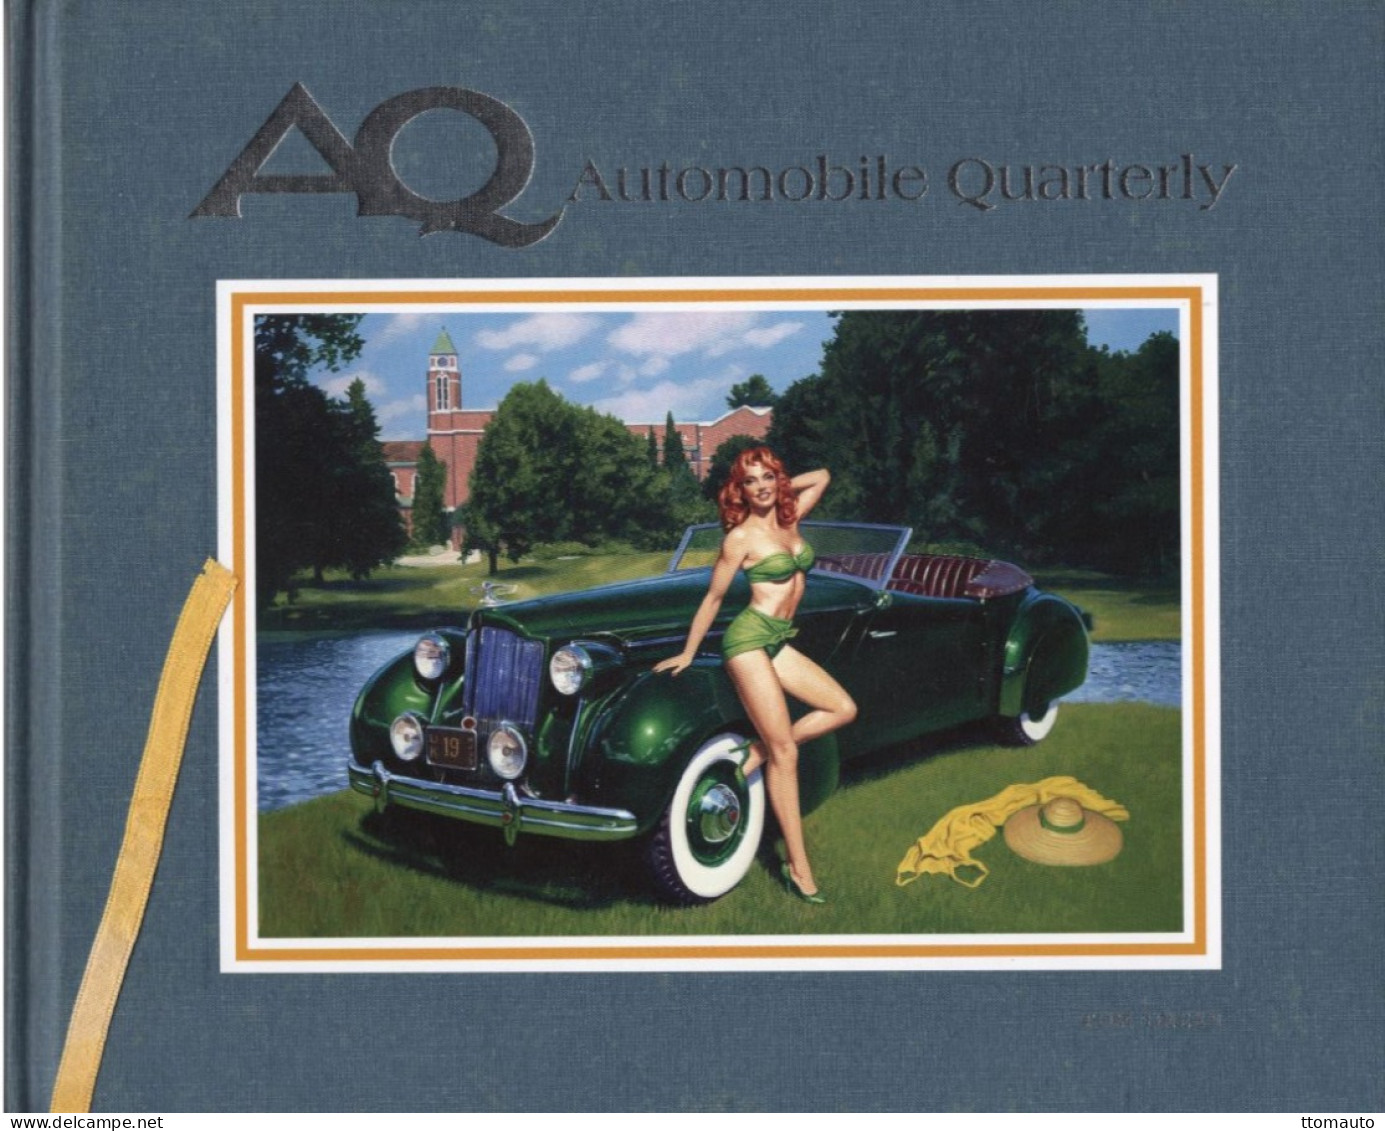 Automobile Quarterly Volume 48 Number 2 (Apr 2008) - Delage-Austin FX4-Lanchester - FREE SHIPPING TO EUROPE & US - Transports